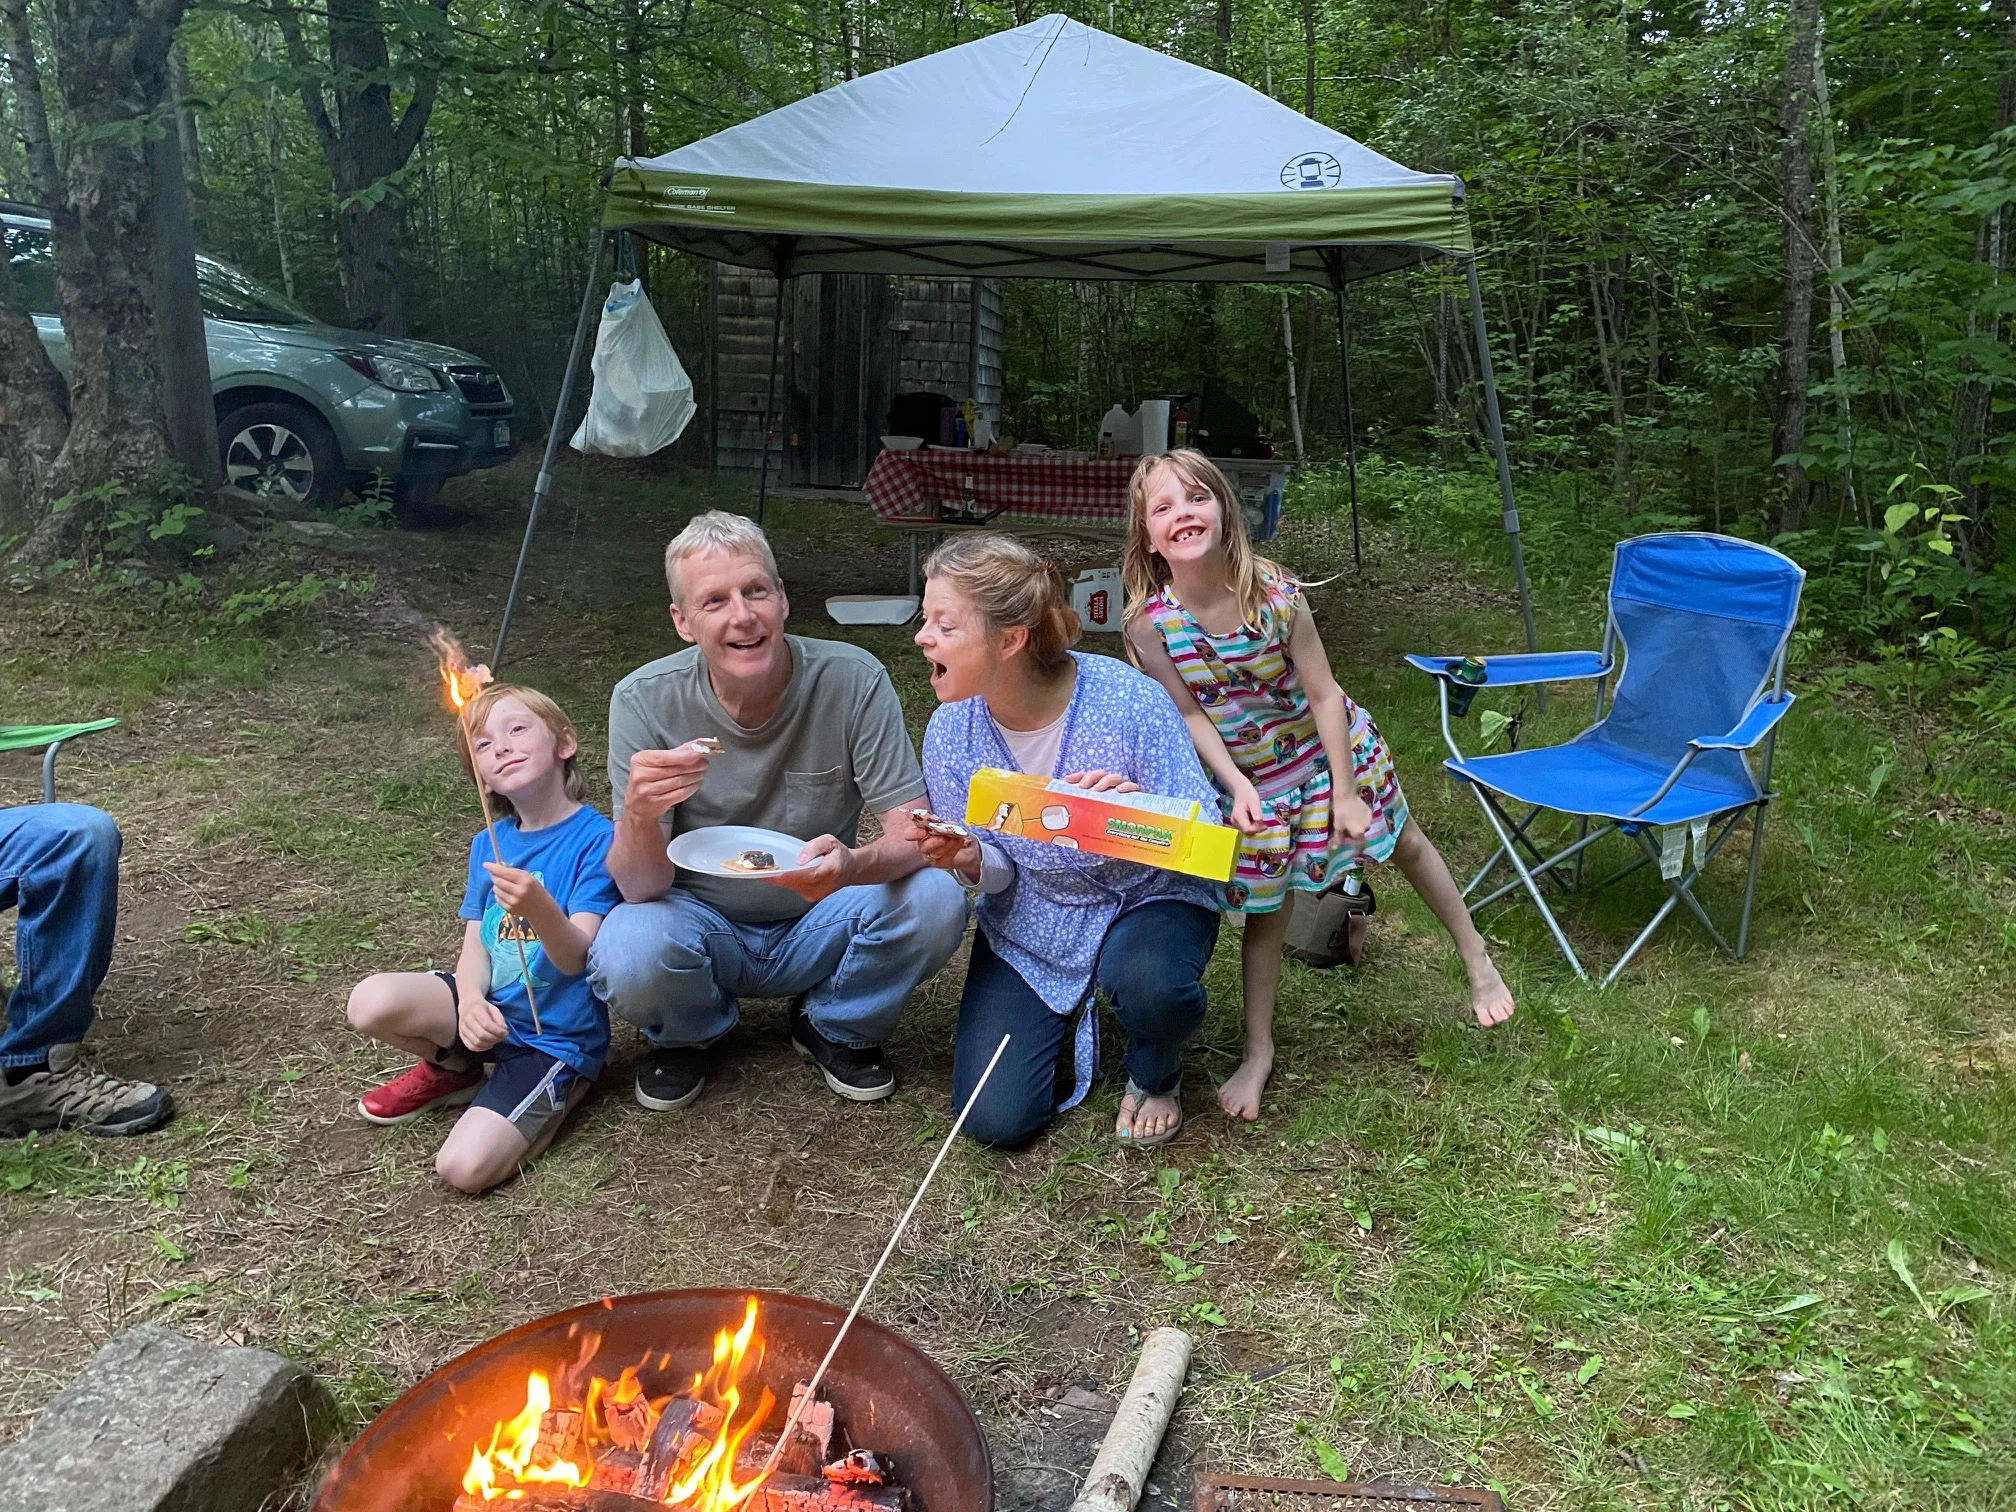 Owner and family roasting marshmallows by campfire